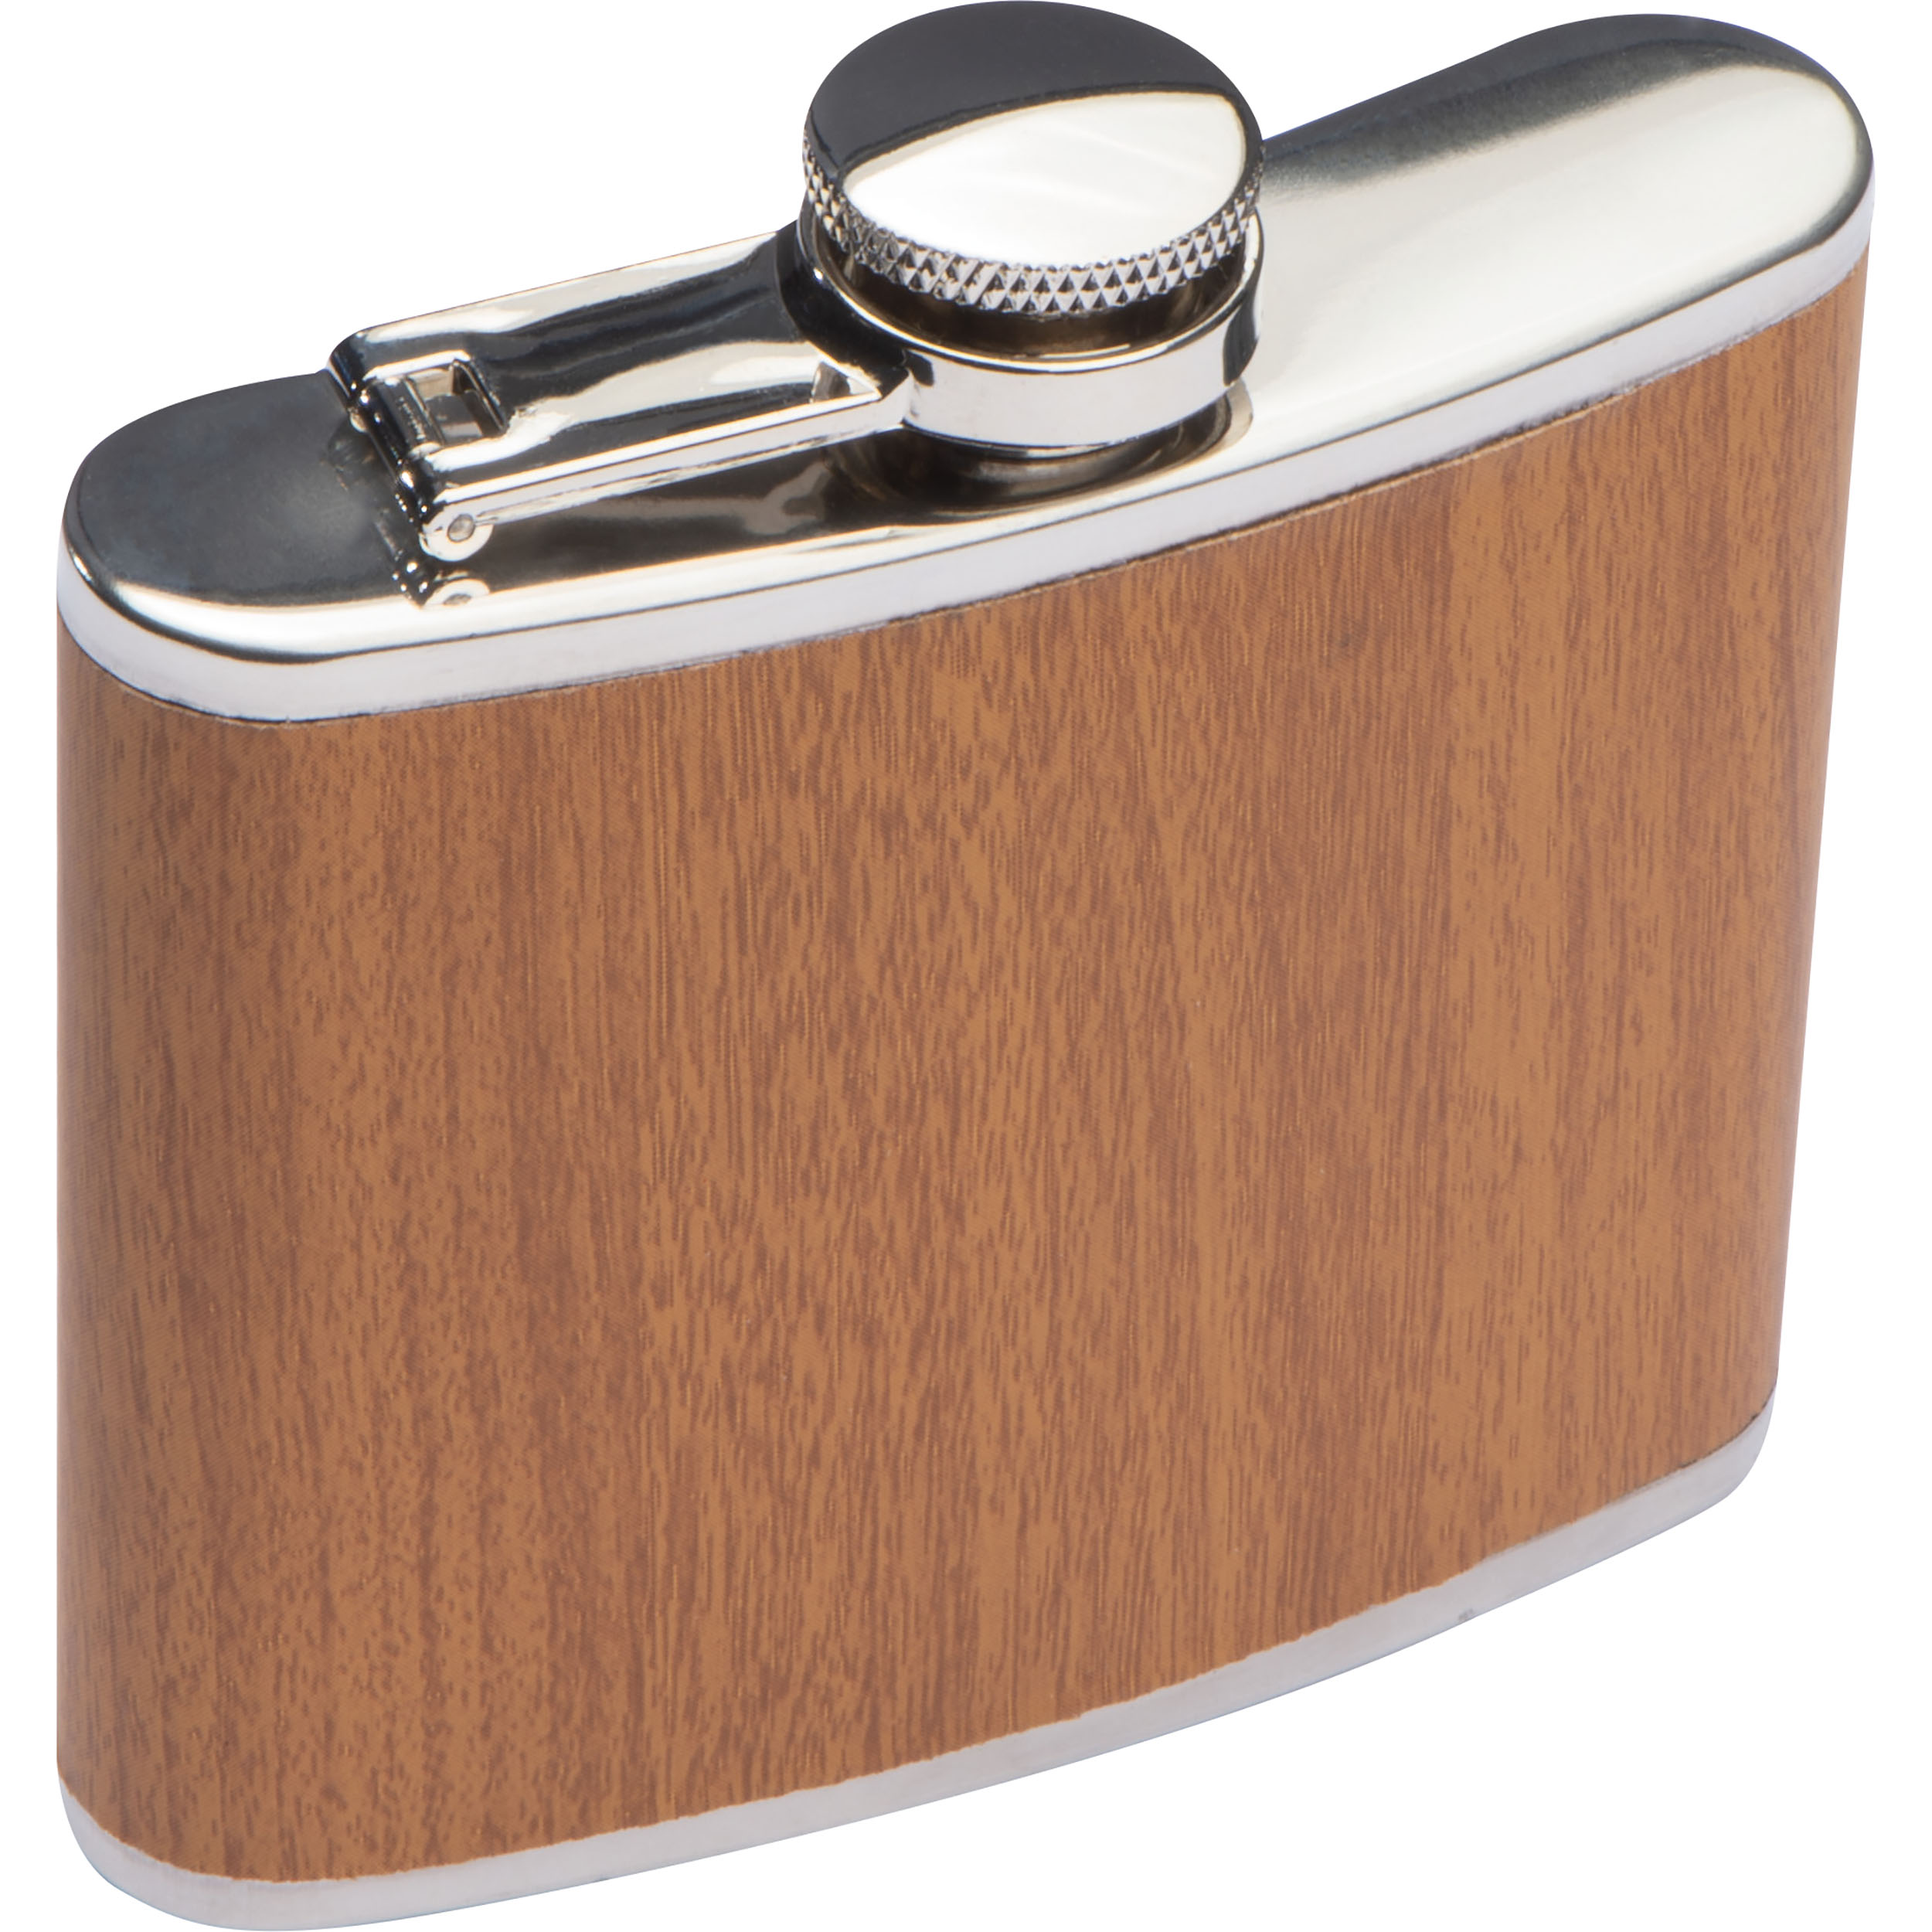 A hip flask covered in wood - Great Horwood